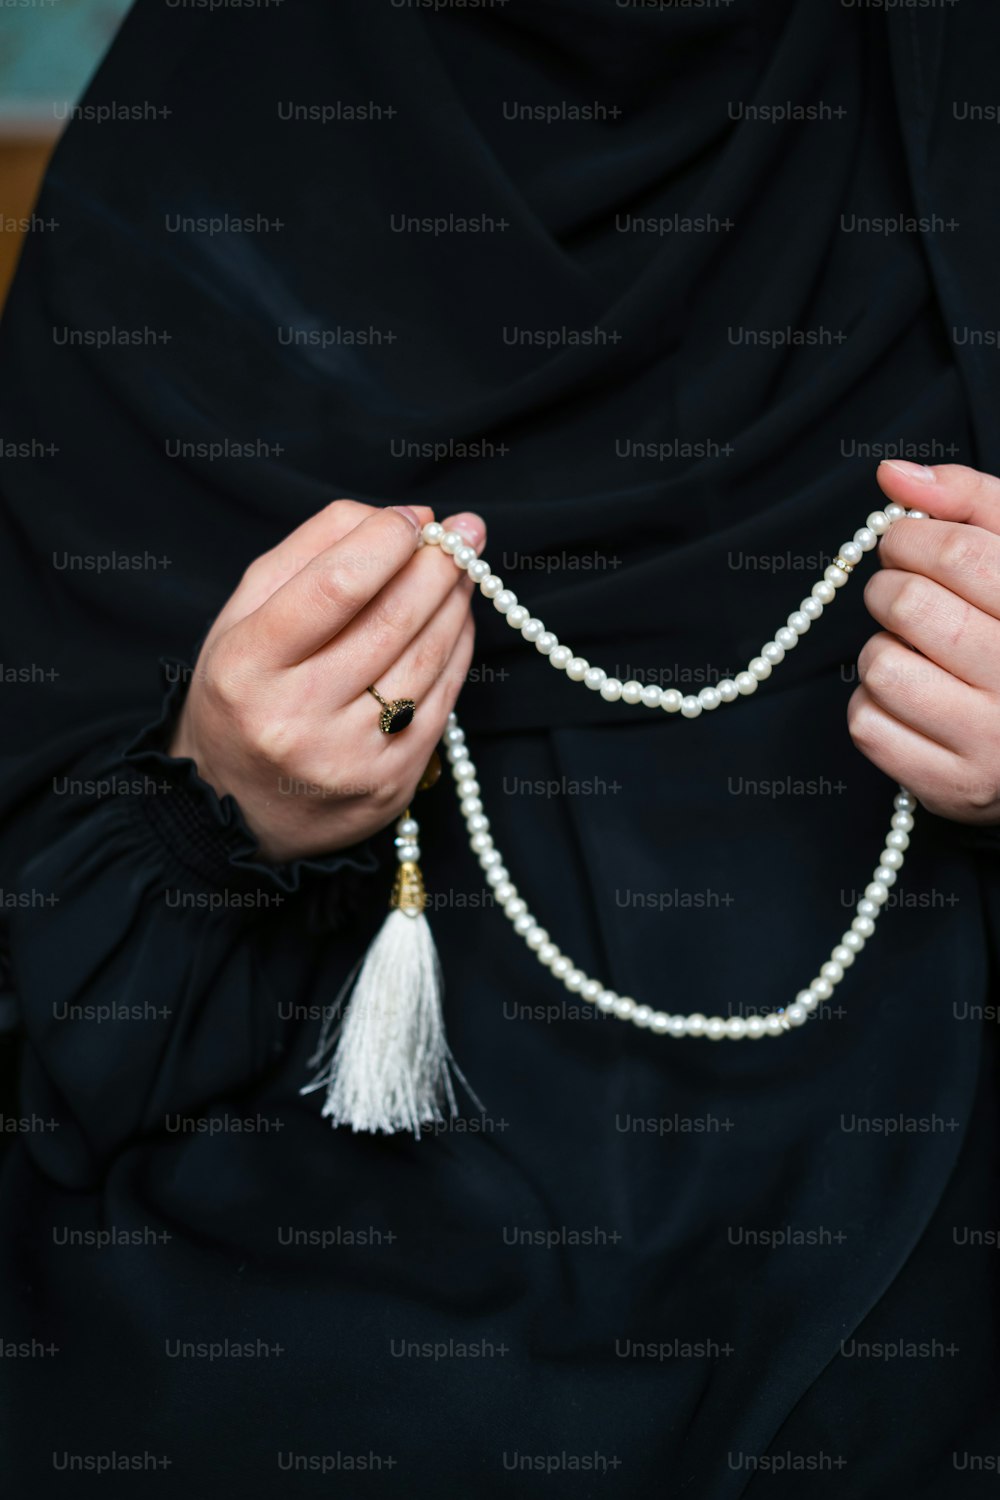 a woman wearing a black outfit holding a white beaded necklace